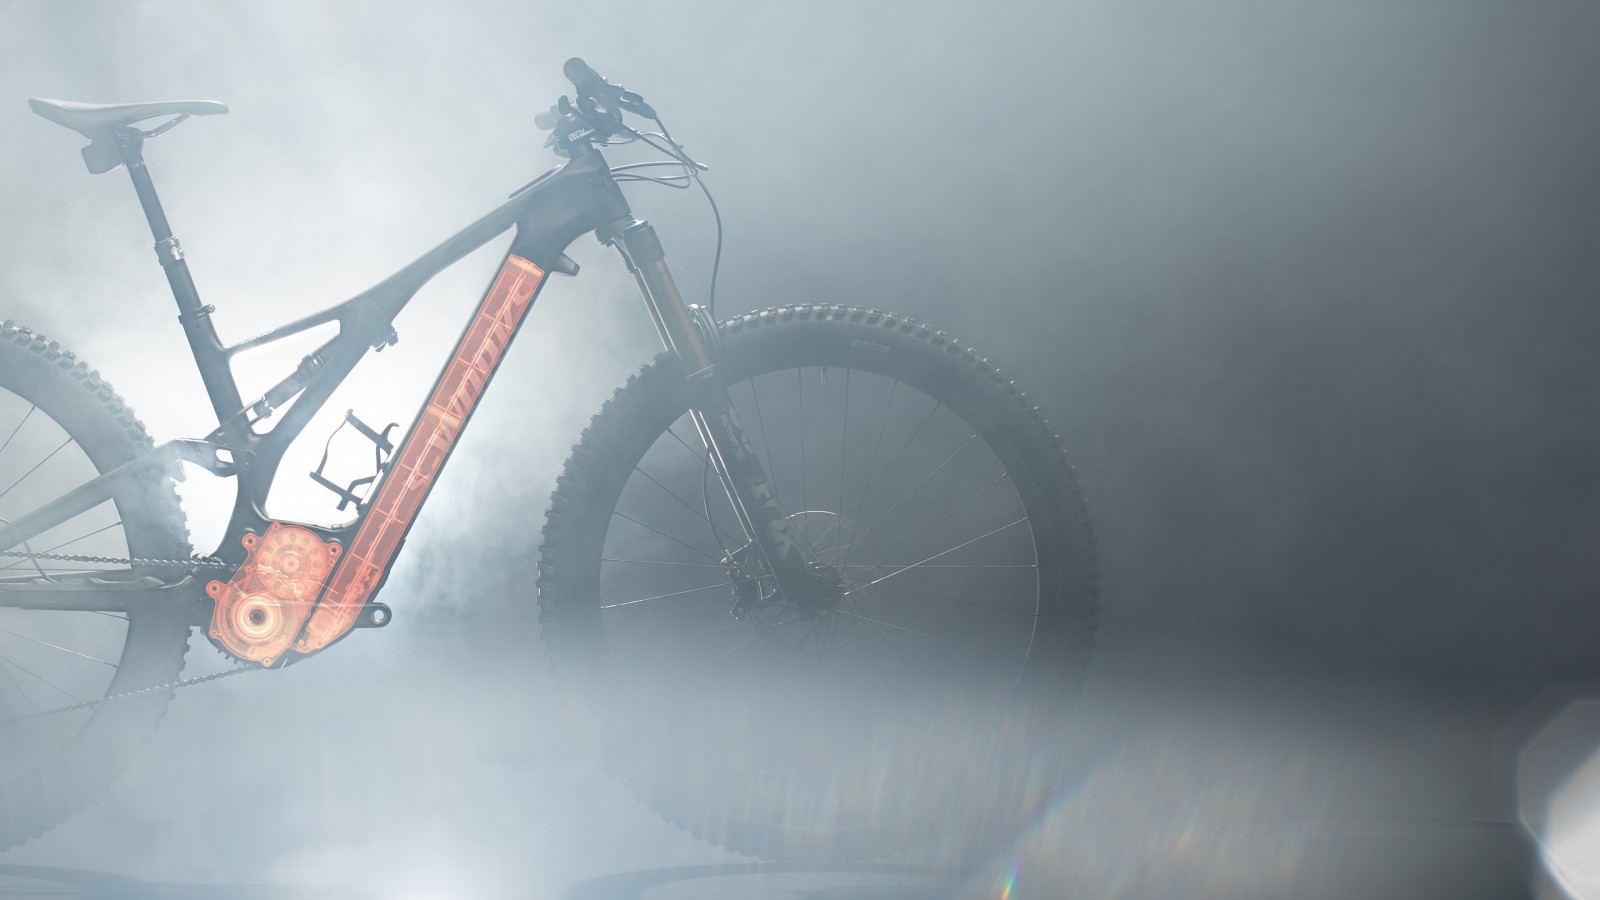 specialized levo expert carbon 2021